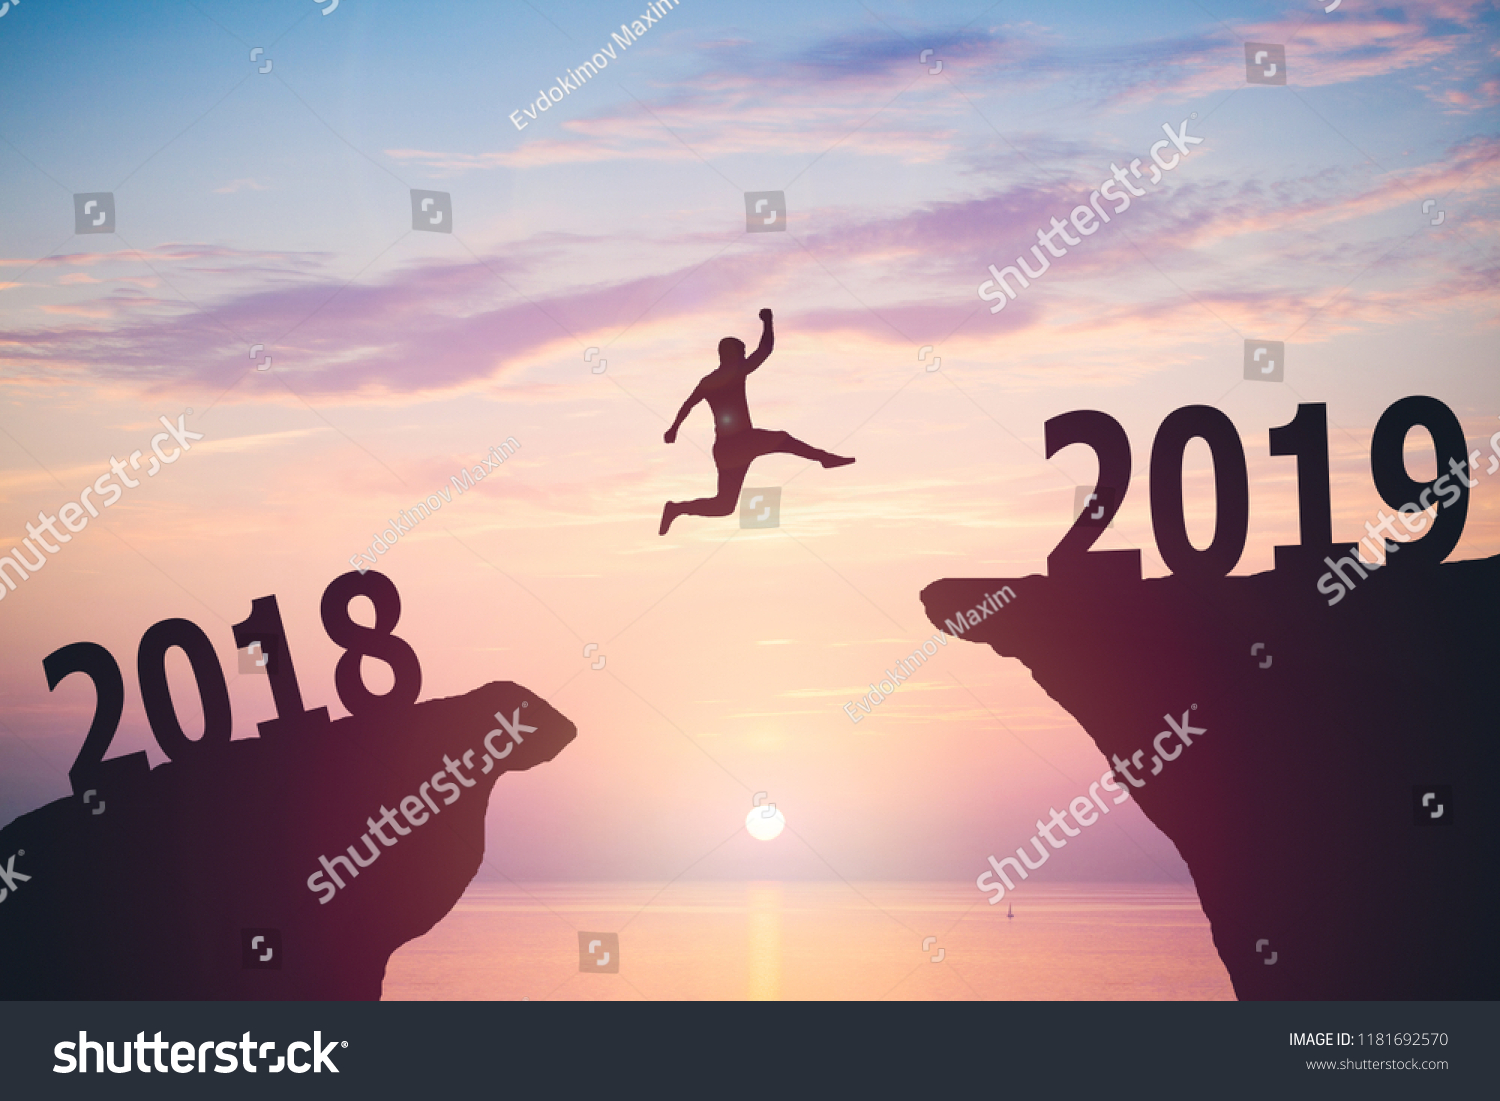 Silhouette of man jumping from 2017 to 2018 text #1181692570